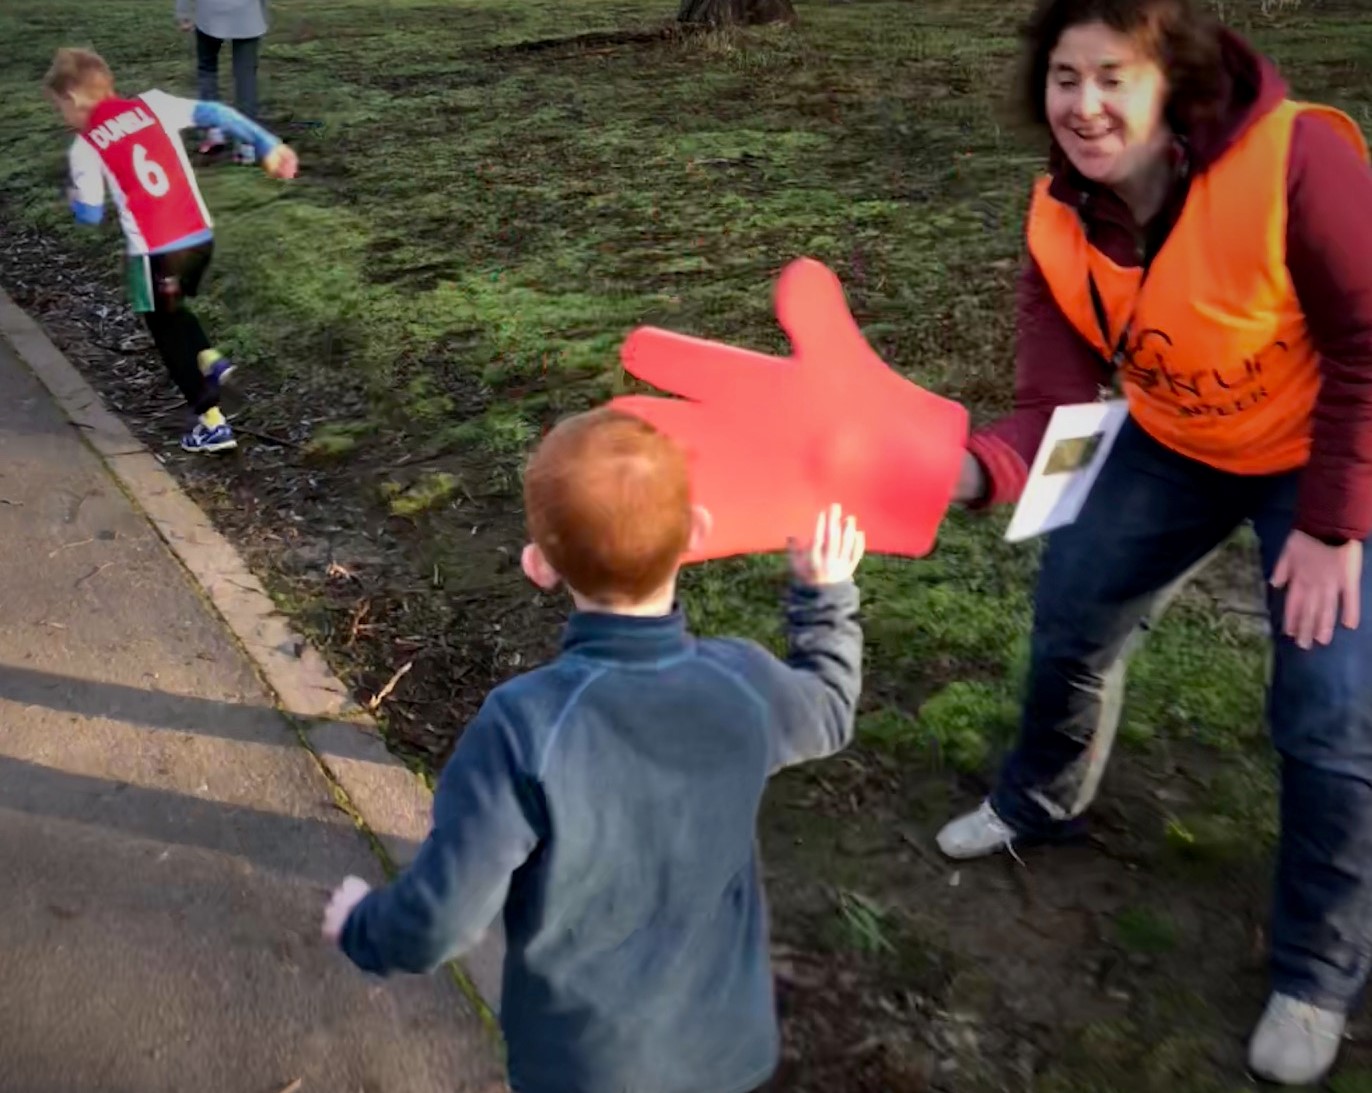 Our 6 year old gets a high-5 at Westerfolds Junior parkrun